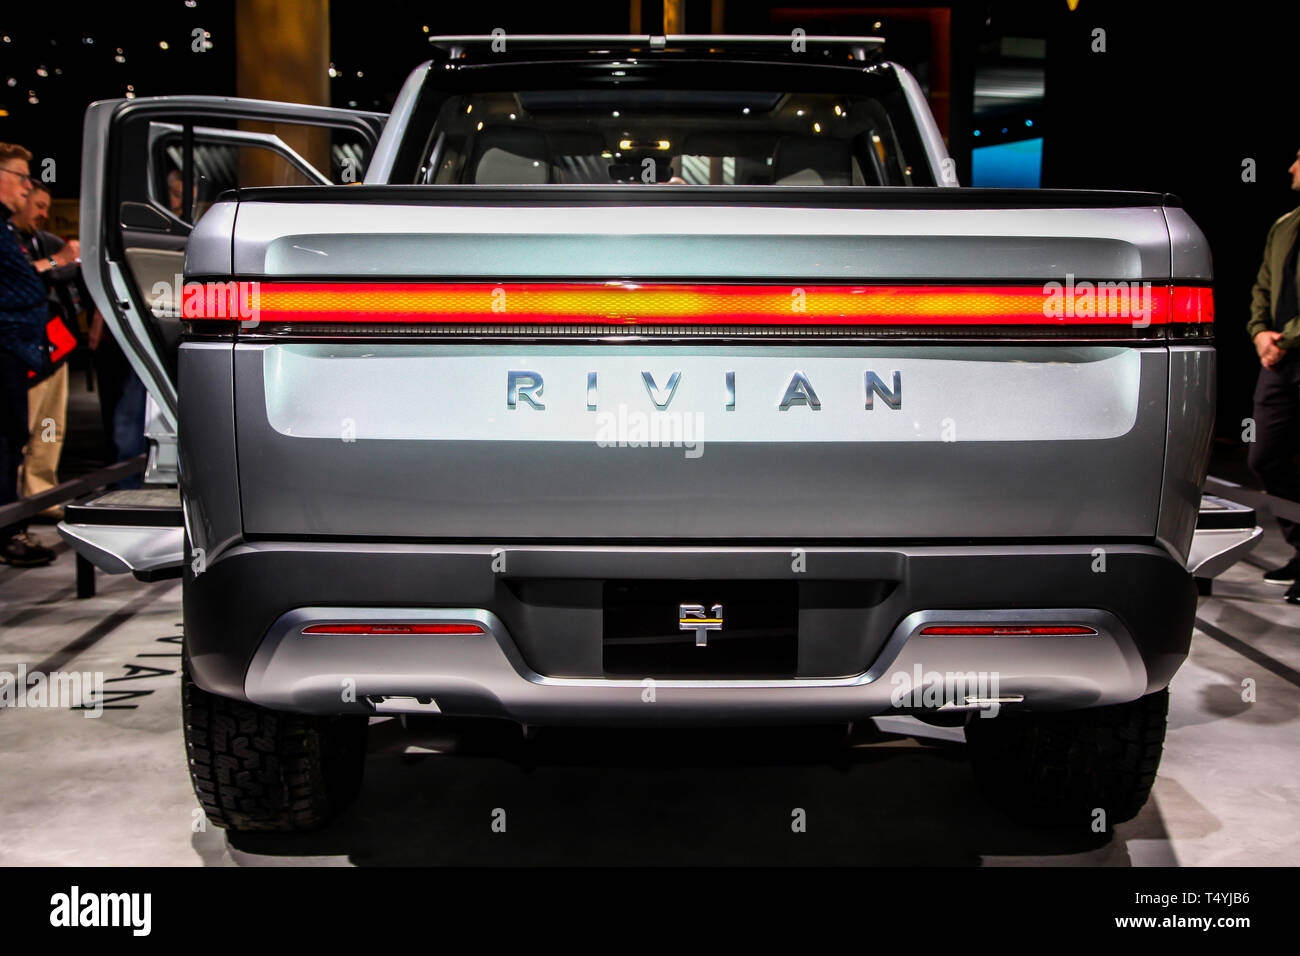 Rivian R1T Pickup truck is an all electric vehicle shown at the New York International Auto Show 2019, at the Jacob Javits Center. This was Press Prev Stock Photo